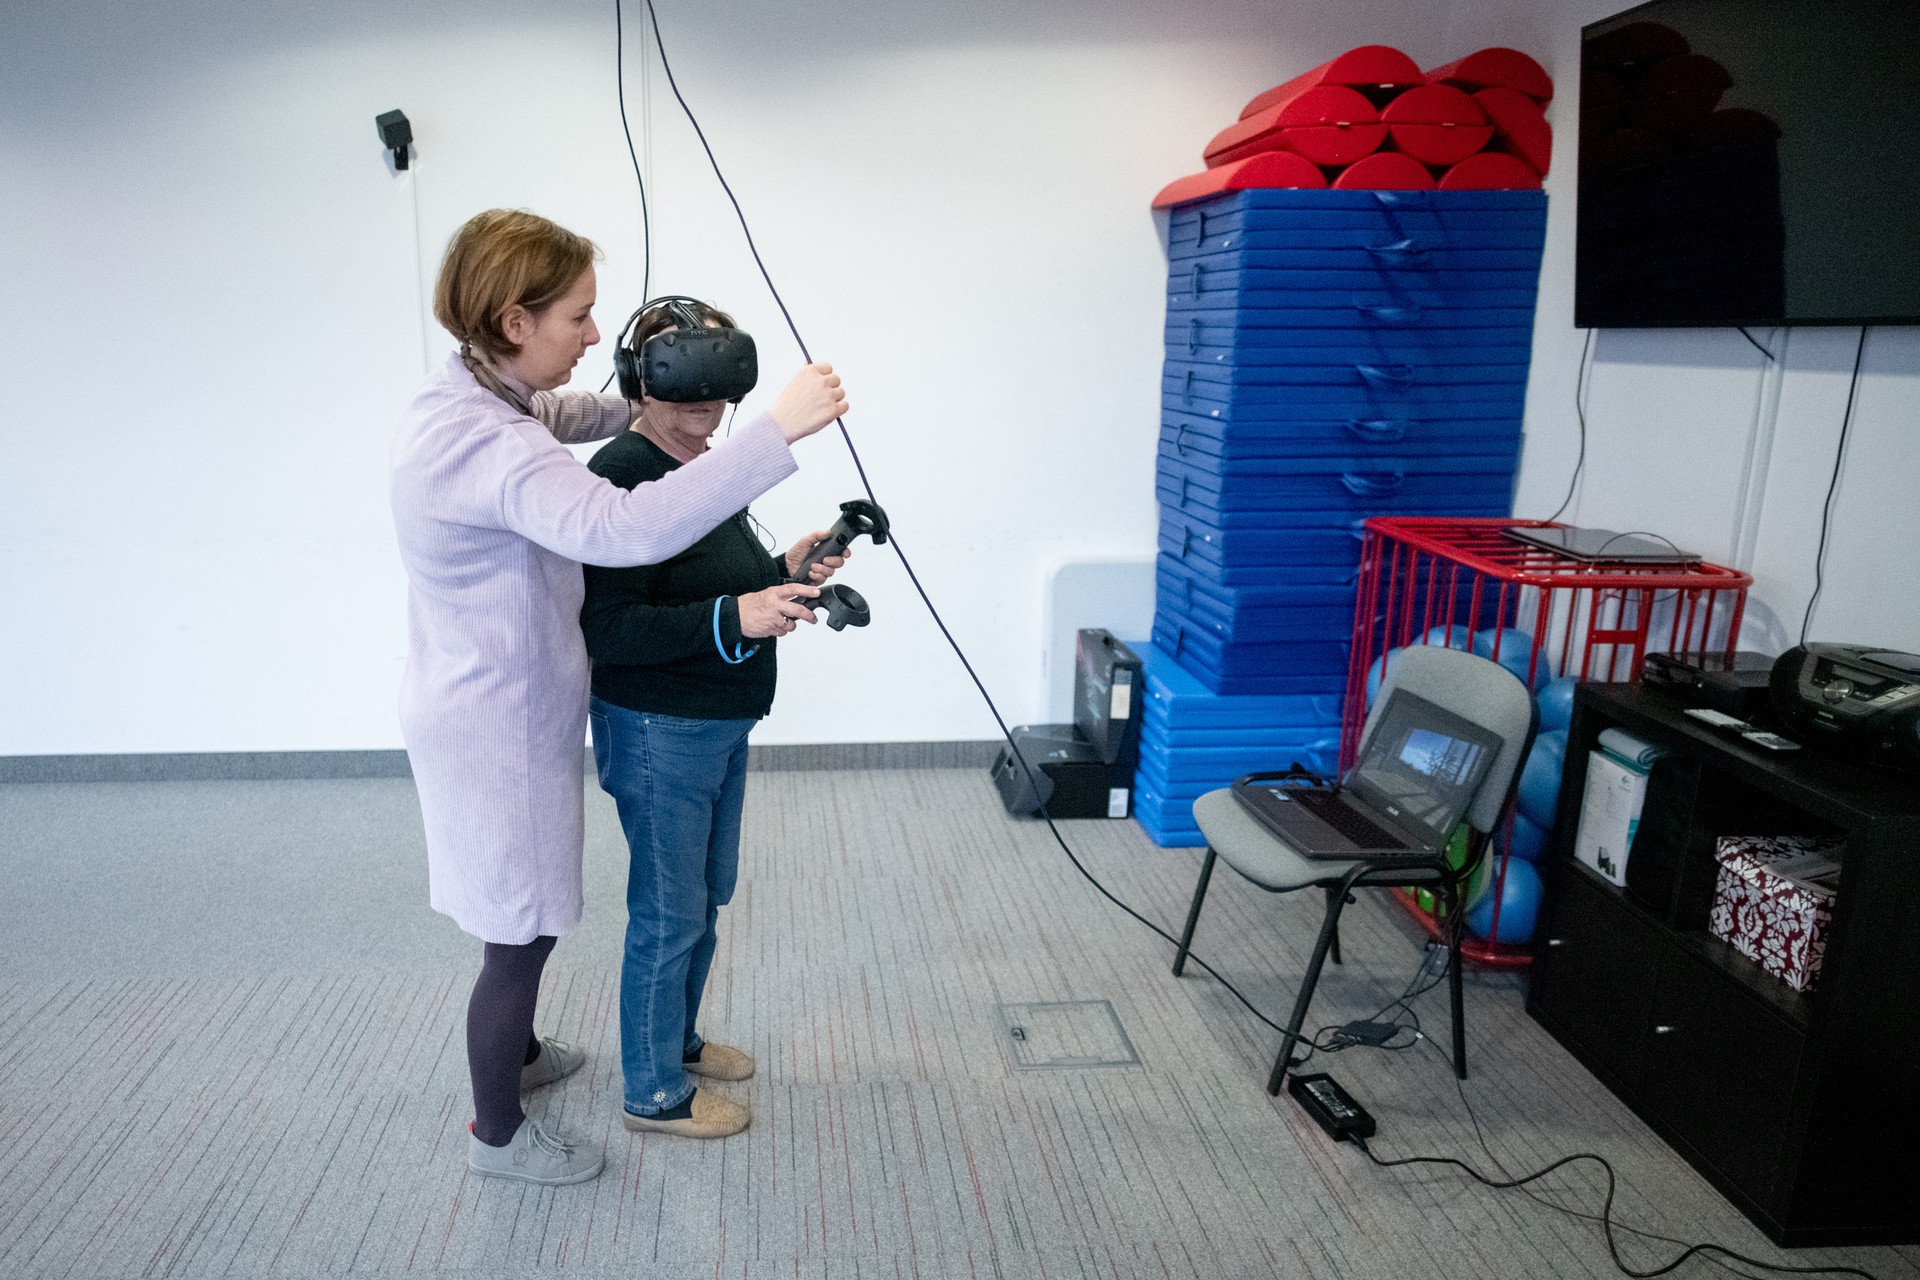 Thanks to virtual reality, leaders of the Wielkopolskie Alzheimer's Association can instantly find themselves in a different space, not